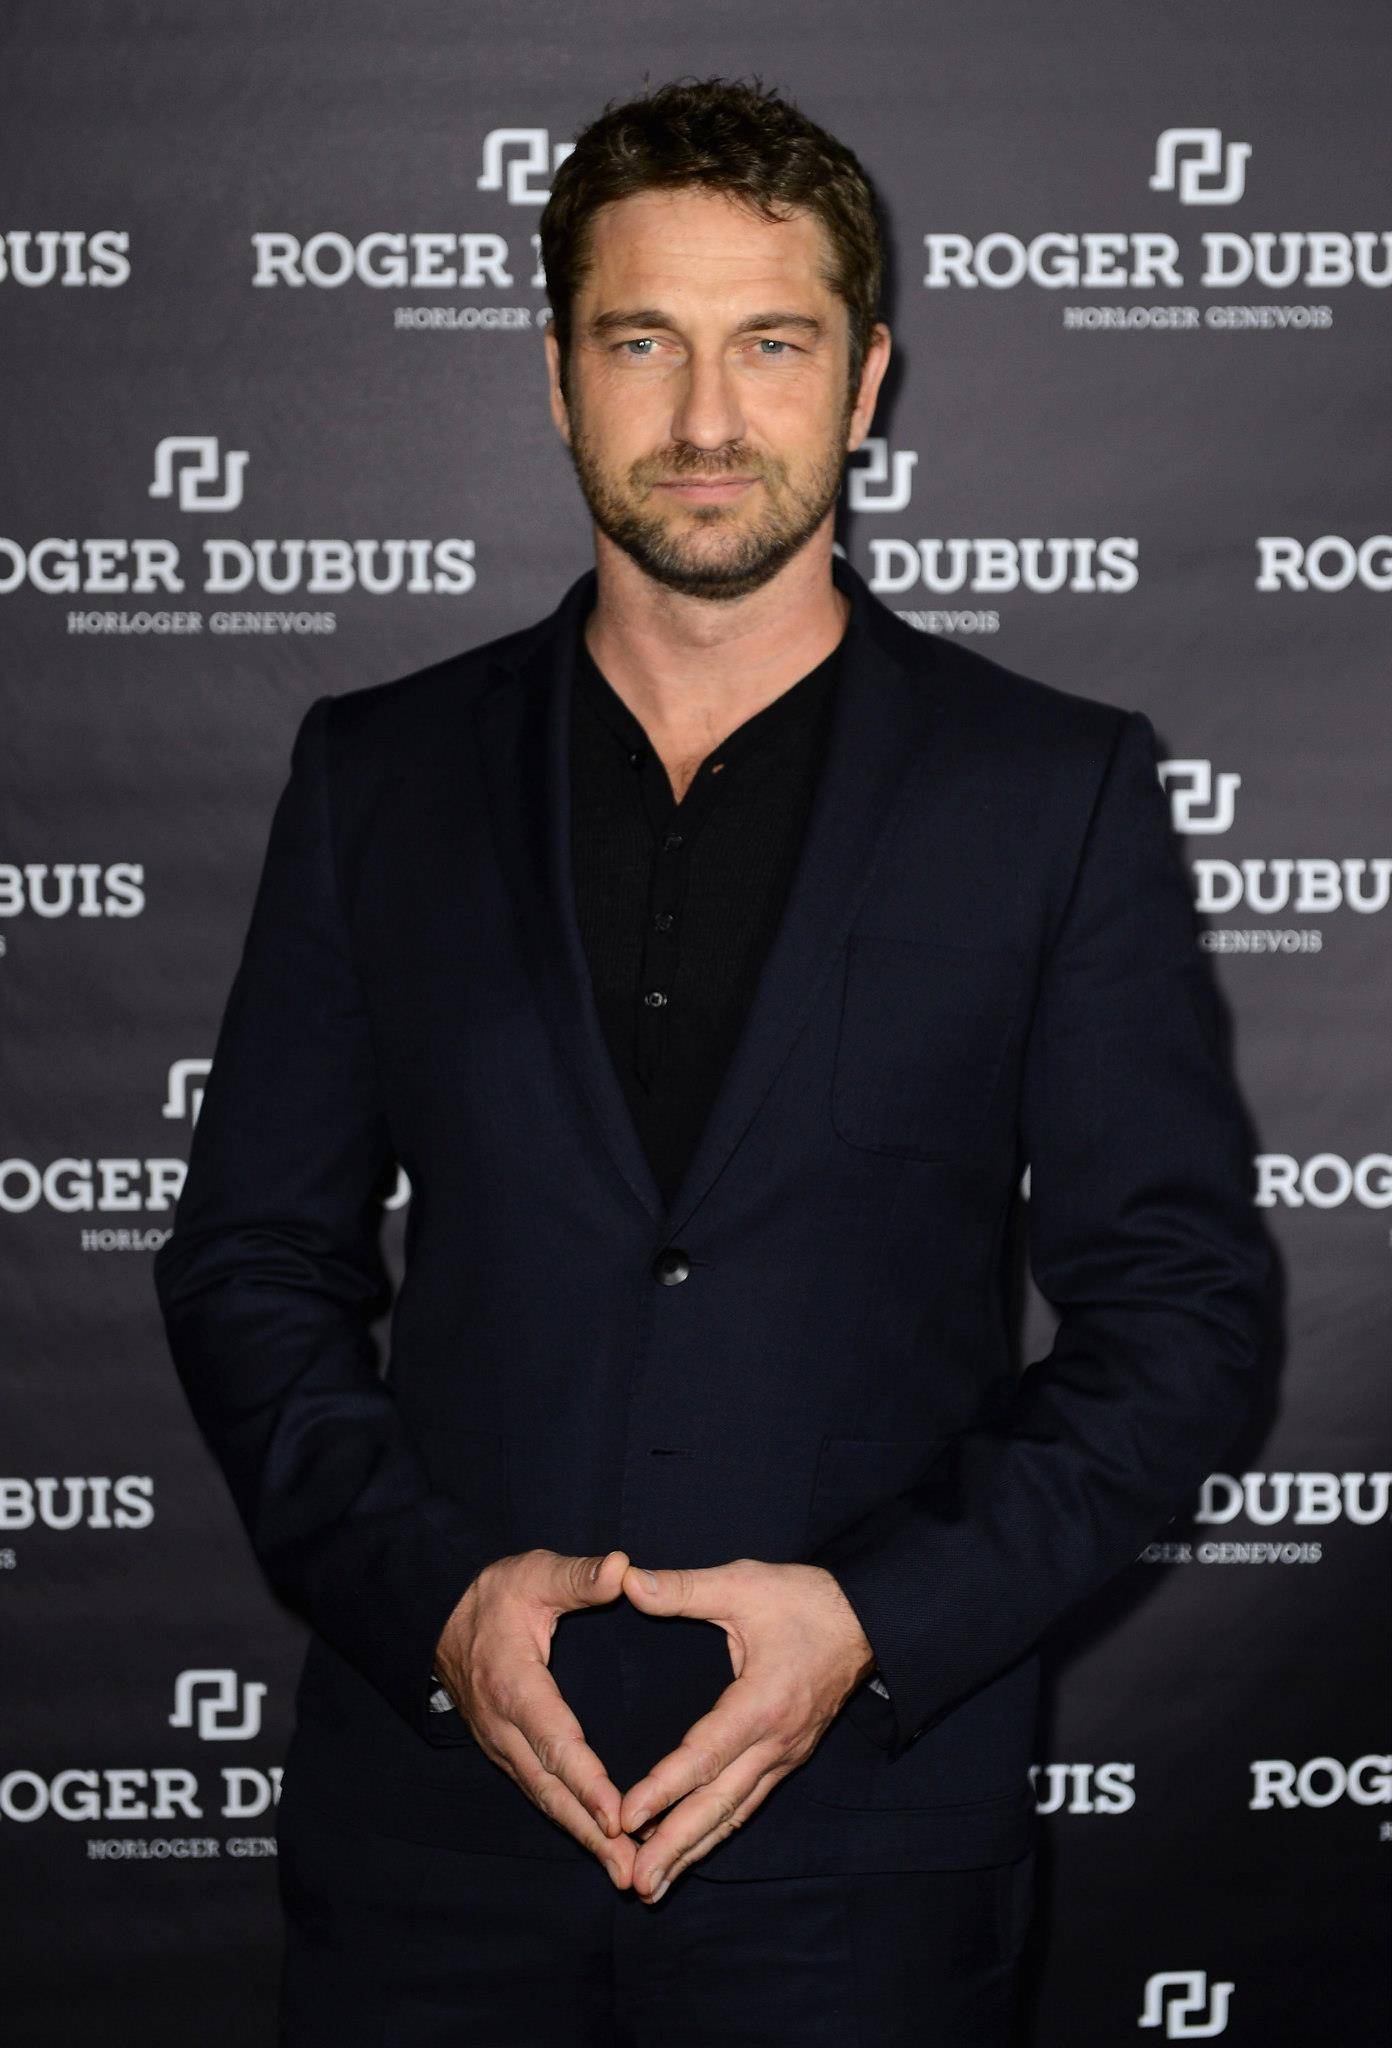 Actor Gerard Butler Shares; “I Worked at Roger Dubuis”